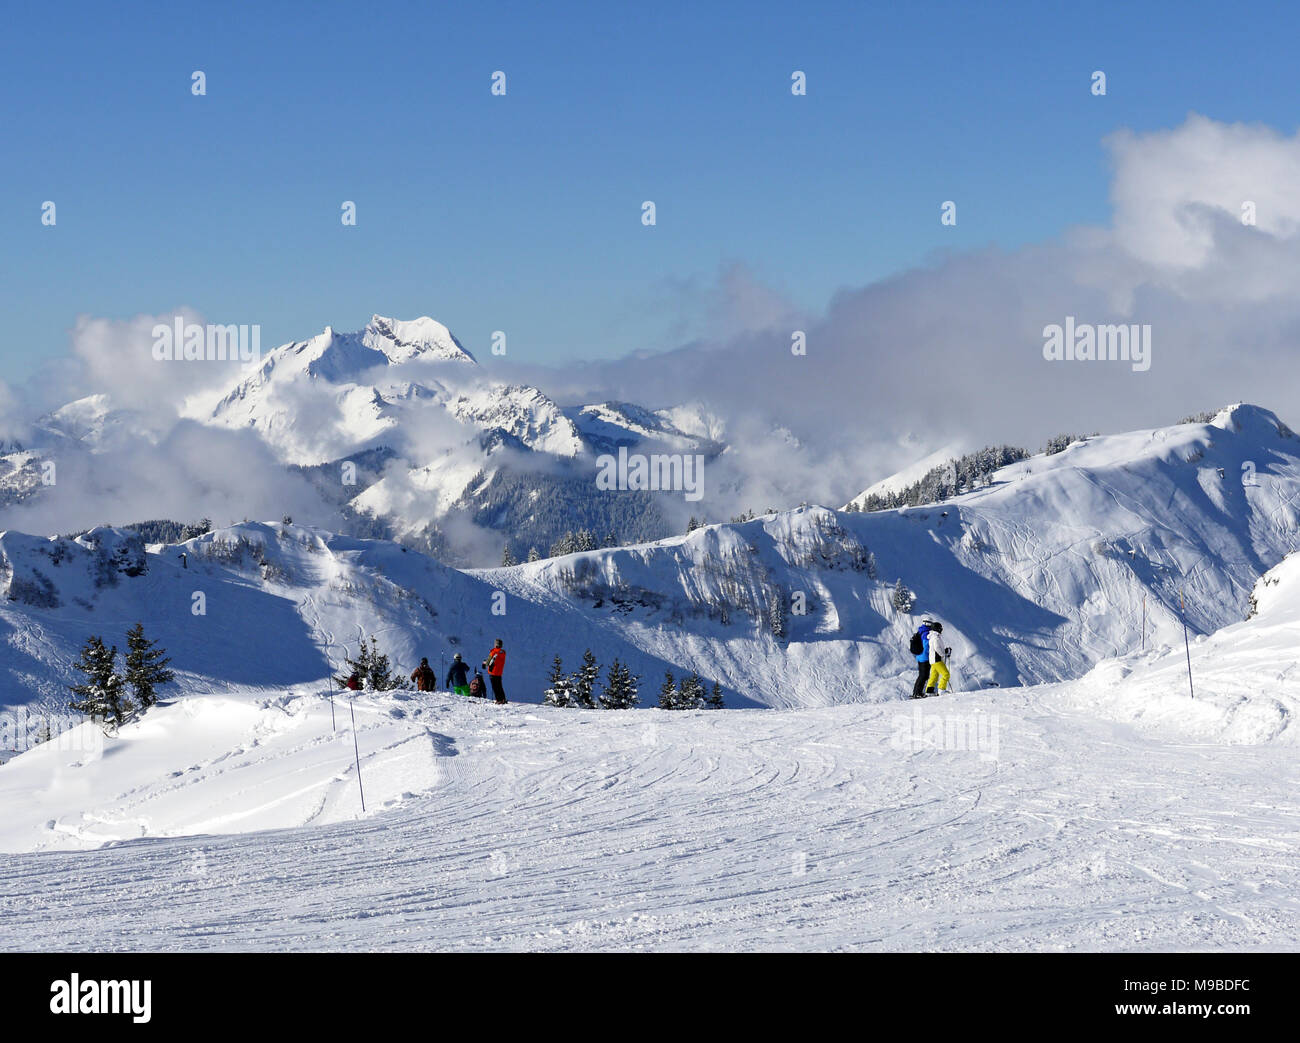 The busy ski resort of Chatel in the Portes du Soleil area of France Stock Photo